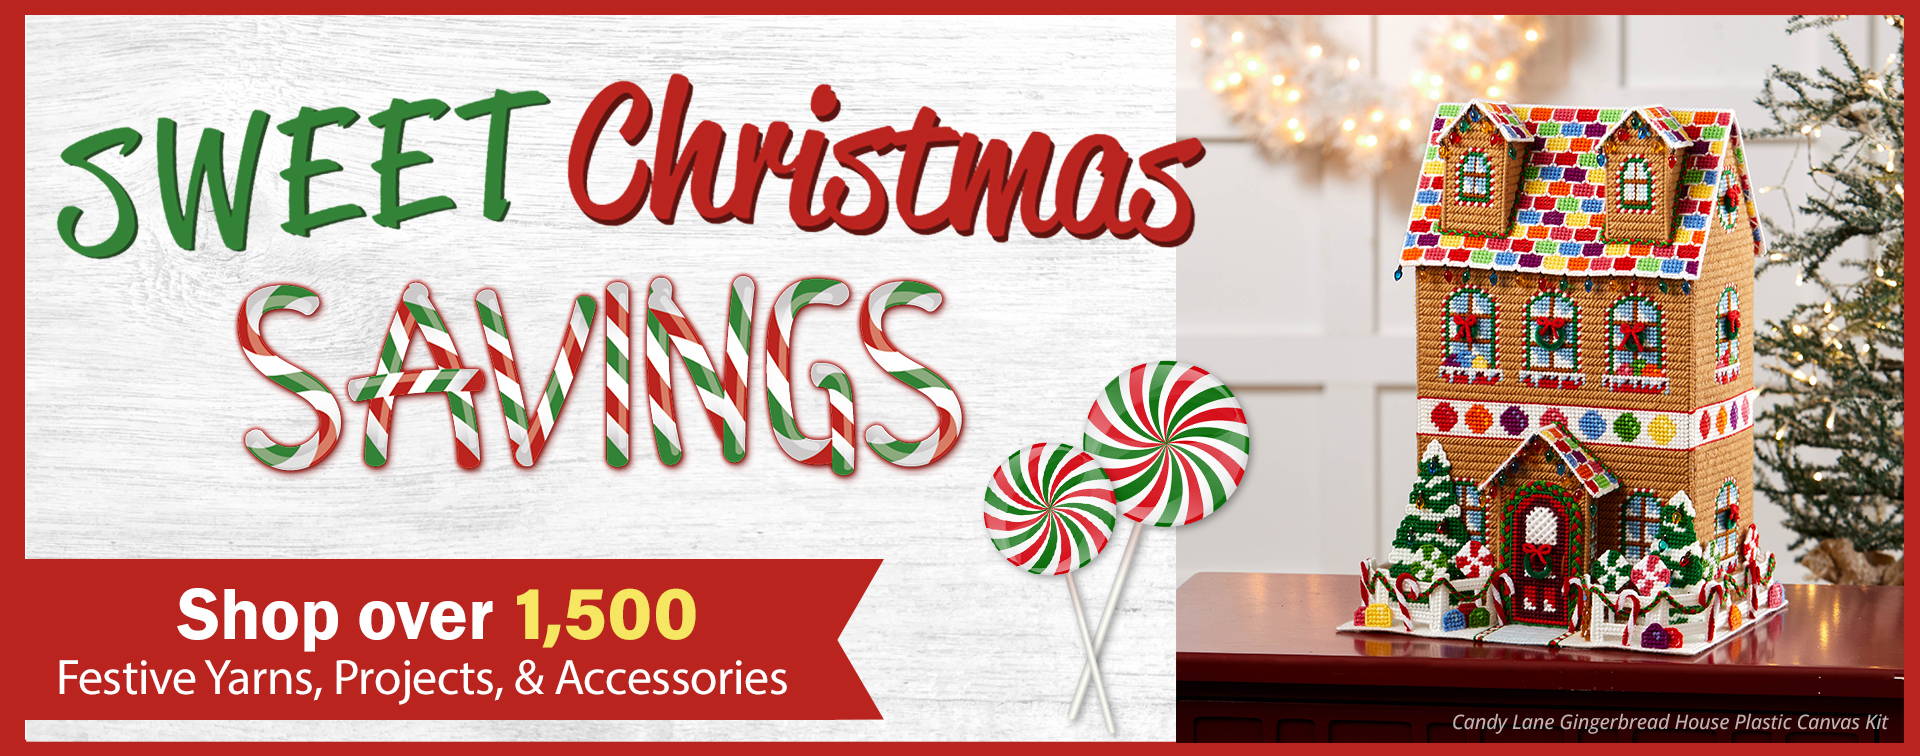 Sweet Christmas Savings. Shop ofer 1,500 Festive Yarns, Projects & Accessories.